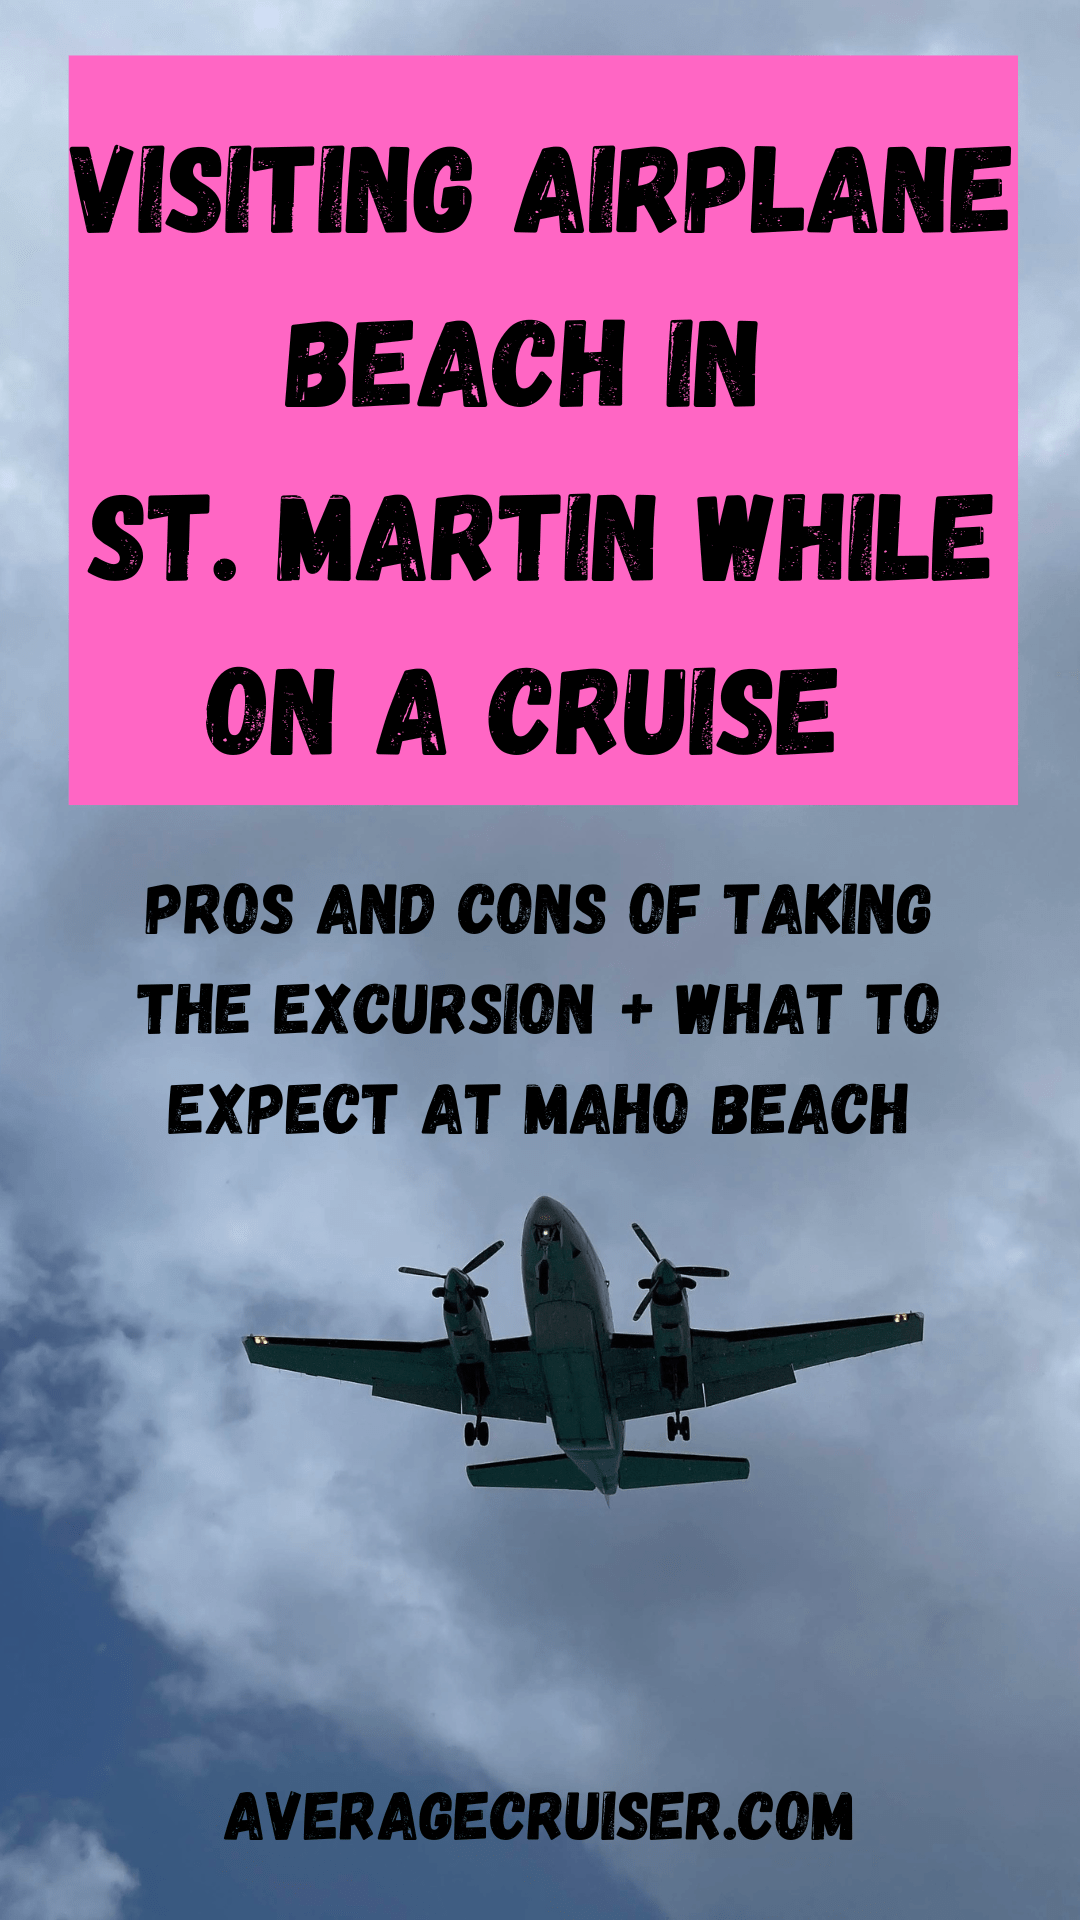 visiting Airplane maho beach in st. martin while on a cruise